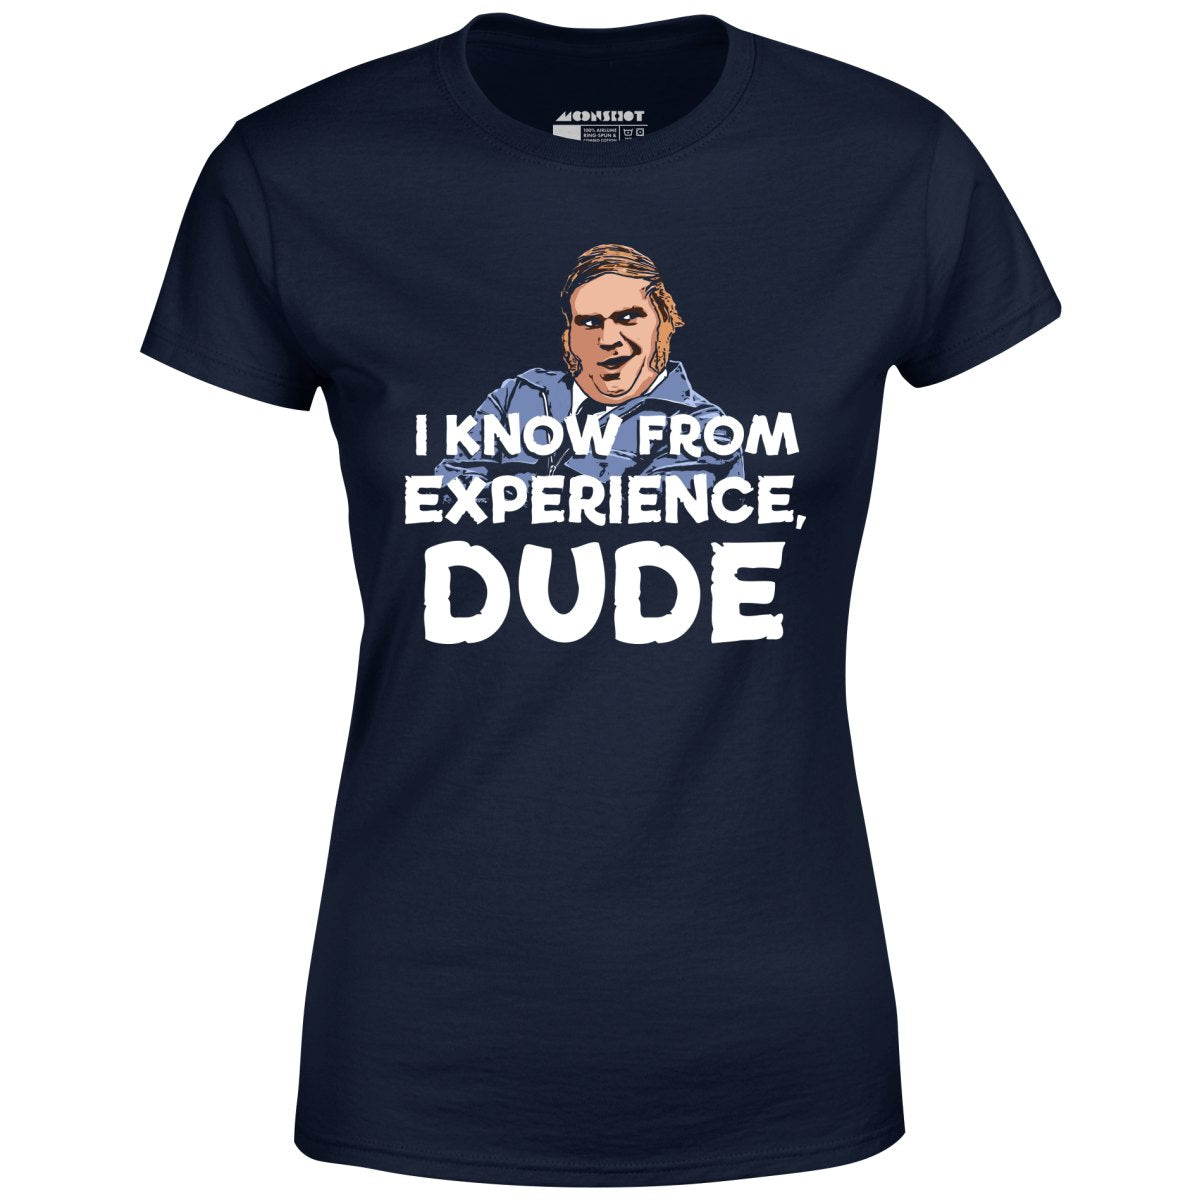 I Know From Experience, Dude - Women's T-Shirt